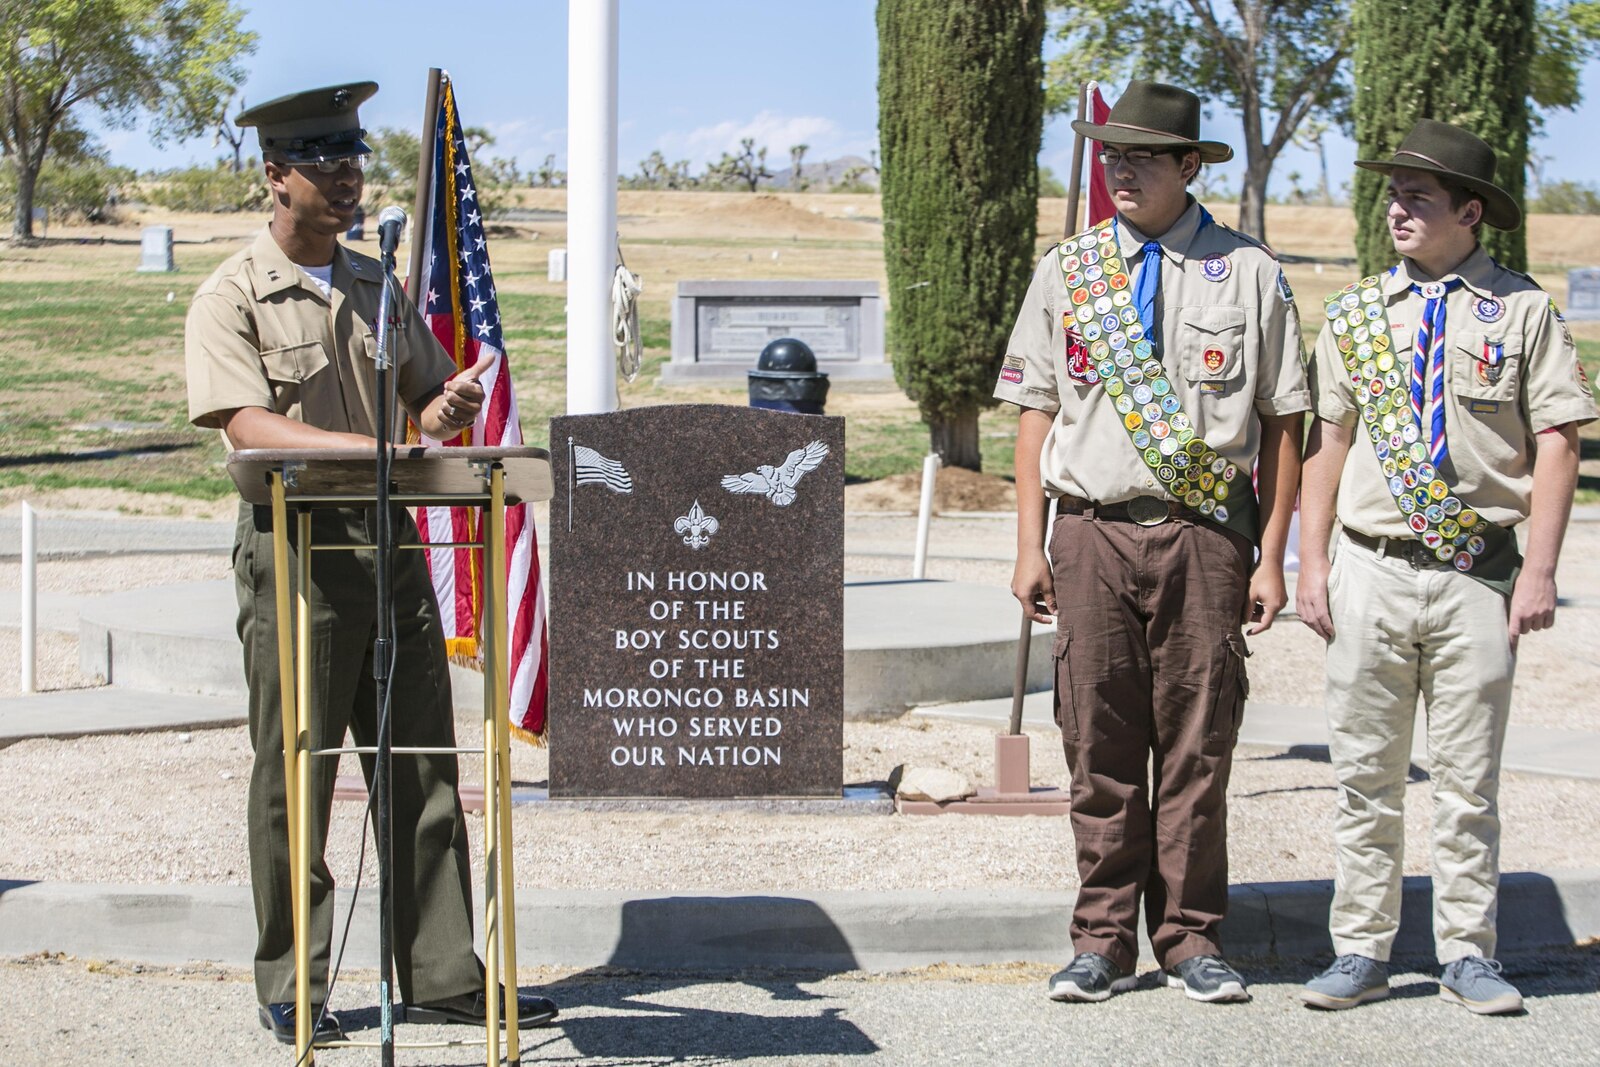 Capt. Jason Samuel, defense counsel, Legal Services Support Team, Headquarters Battalion, serves as the guest speaker at a memorial dedication ceremony for the Boy Scouts of America in Mountain Valley Memorial Park in Joshua Tree, California.